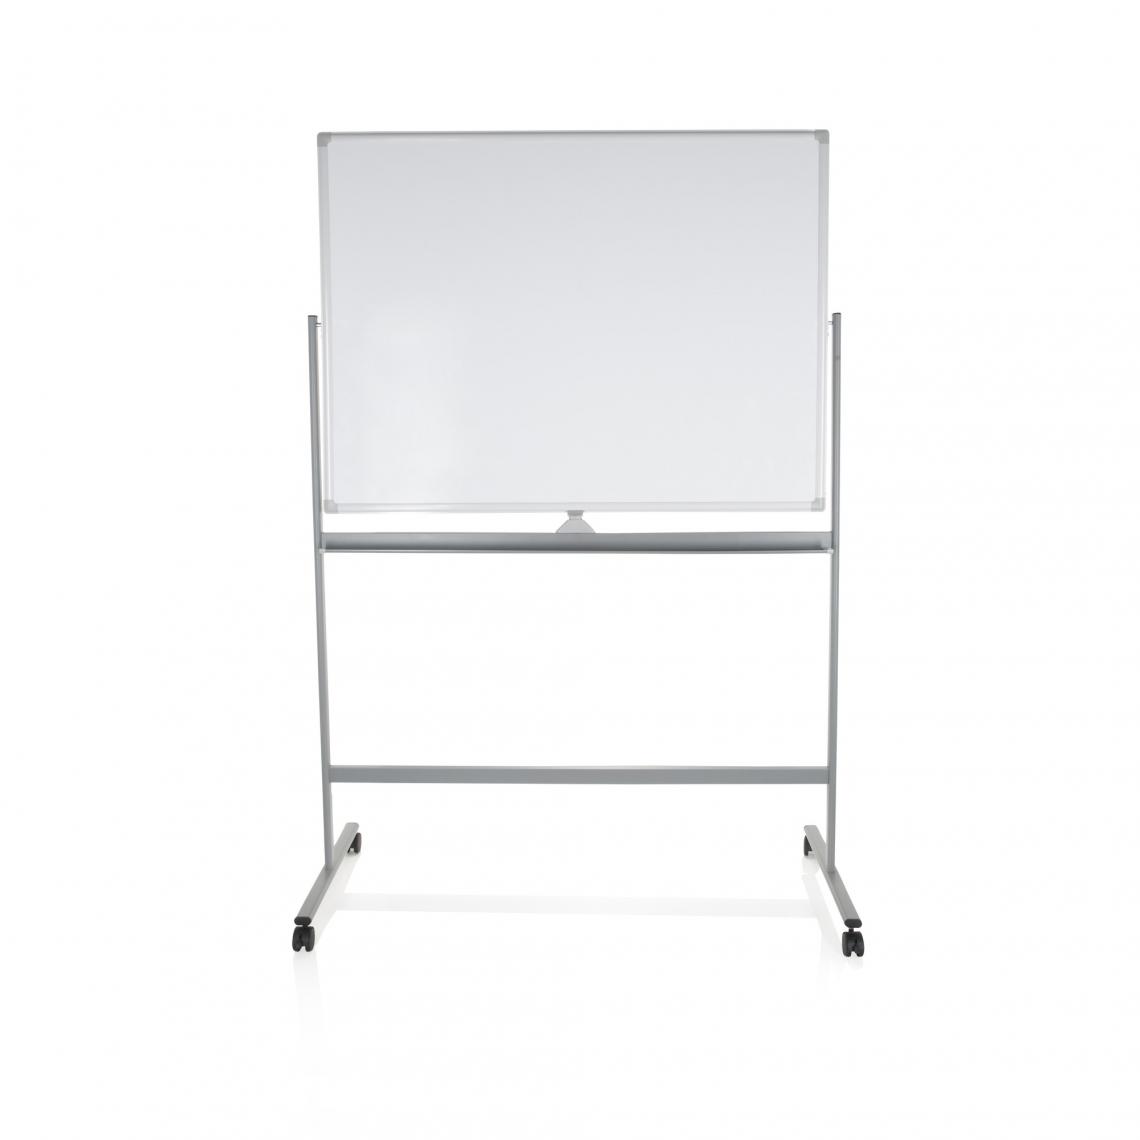 Hjh Office - Tableau blanc MULTIBOARD I magnétiques blanc / argent hjh OFFICE - Chaises